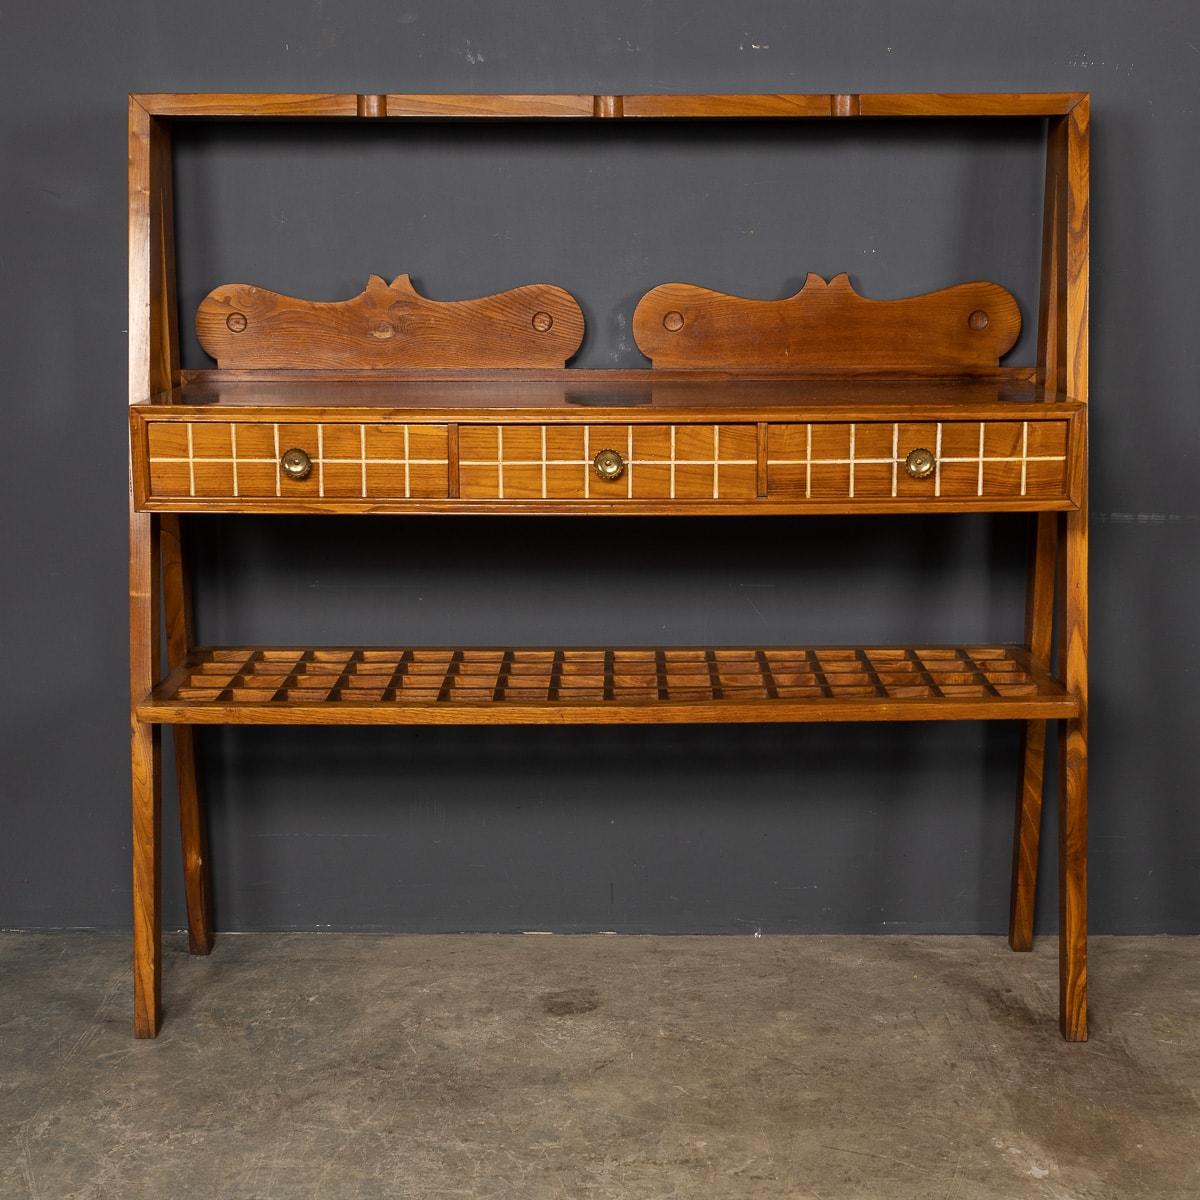 An unusual Mid-20th Century Italian three drawer dresser created from solid oak. This dresser was designed by Paulo Buffa, an Italian architect and designer who speciliased in traditional craftsmanship with a twist of modern design.